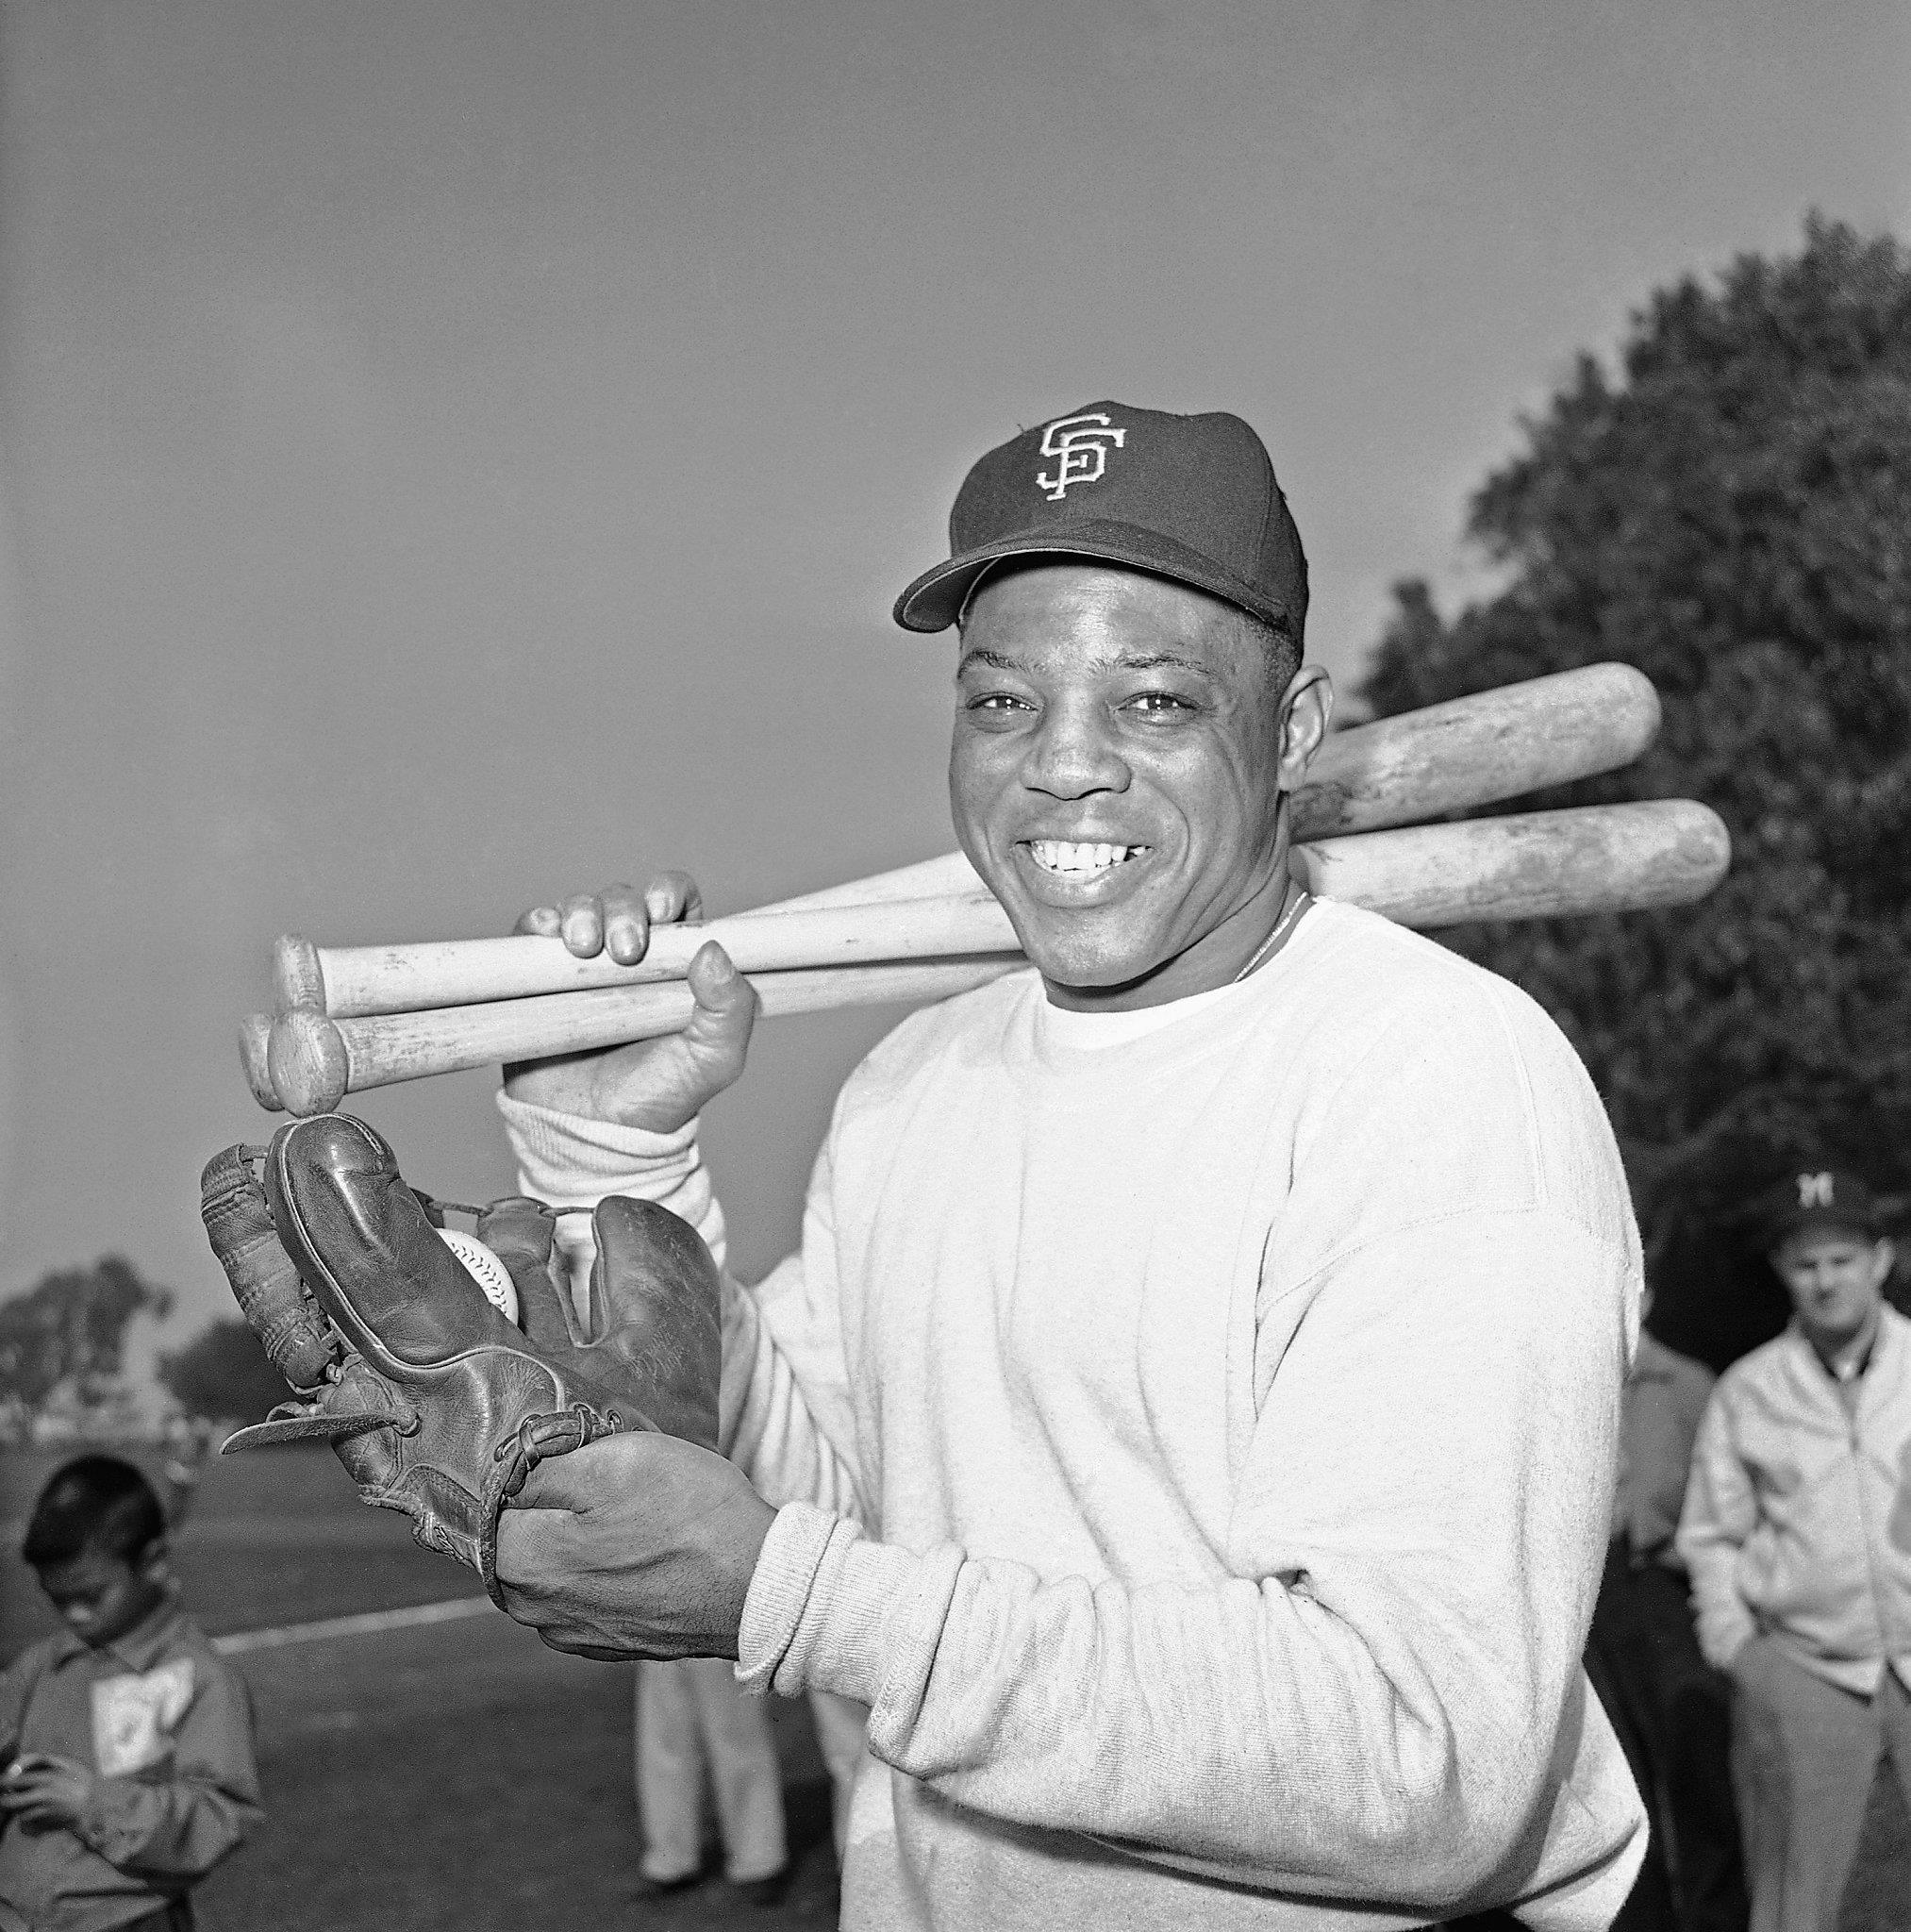 Willie Mays at 89: 'My Thing Is Keep Talking and Keep Moving